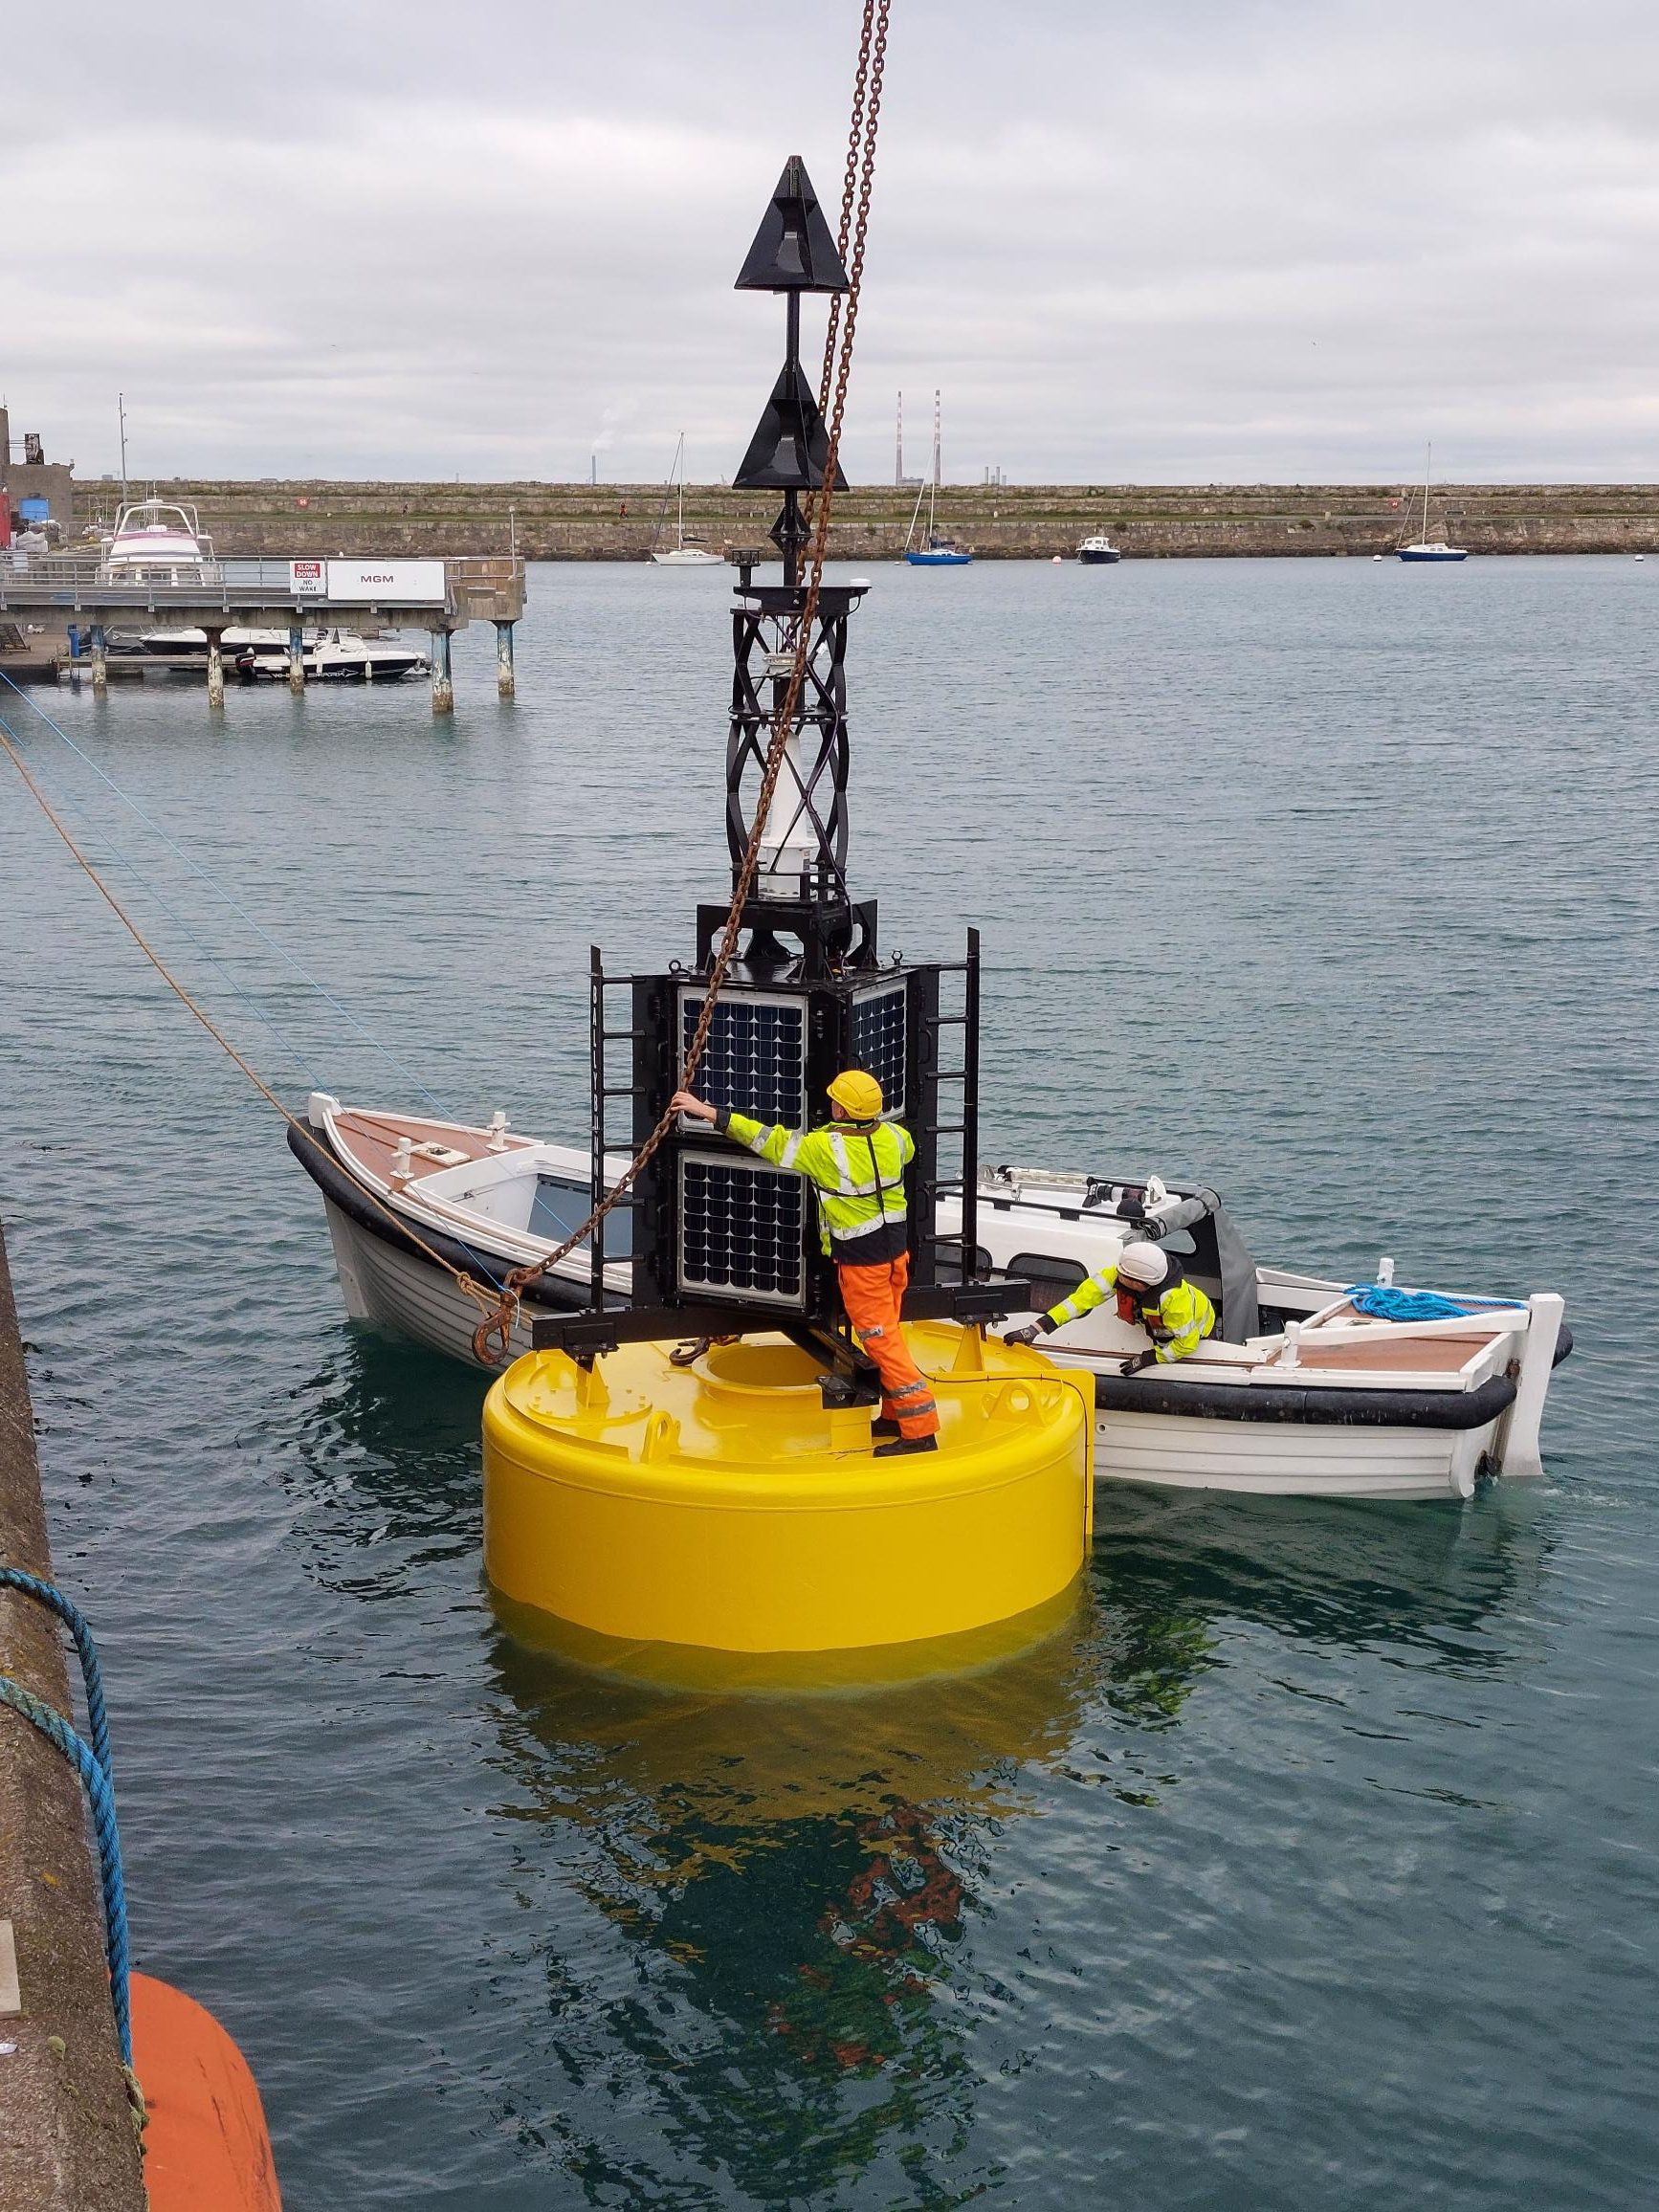 Ballybunnion Buoy being unhooked from crane at Dun Laoghaire, ready to be towed to Irish Lights ship ILV Granuaile